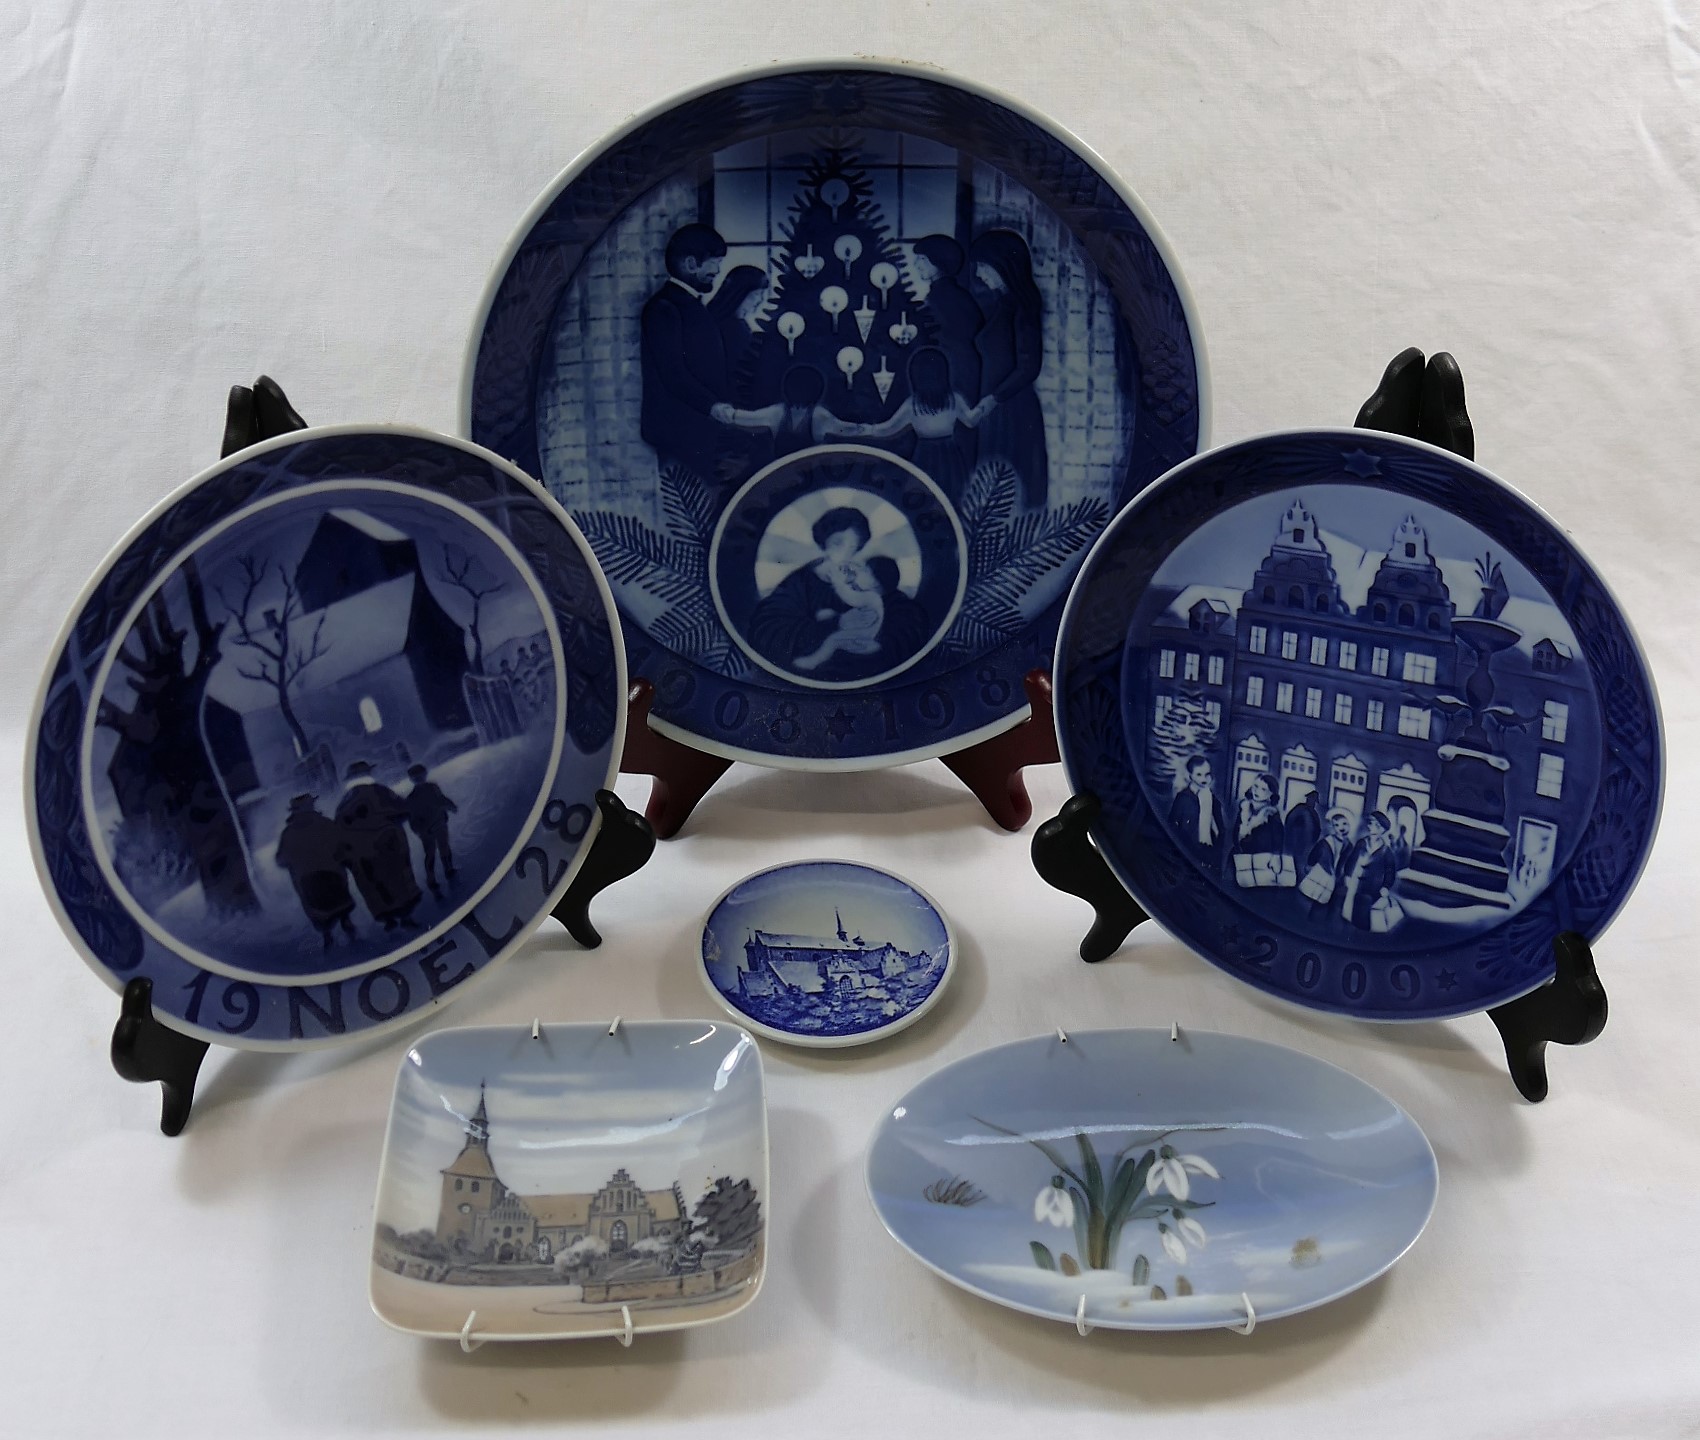 A collection of 50 Royal Copenhagen Christmas plates dating from 1954 to 2013,